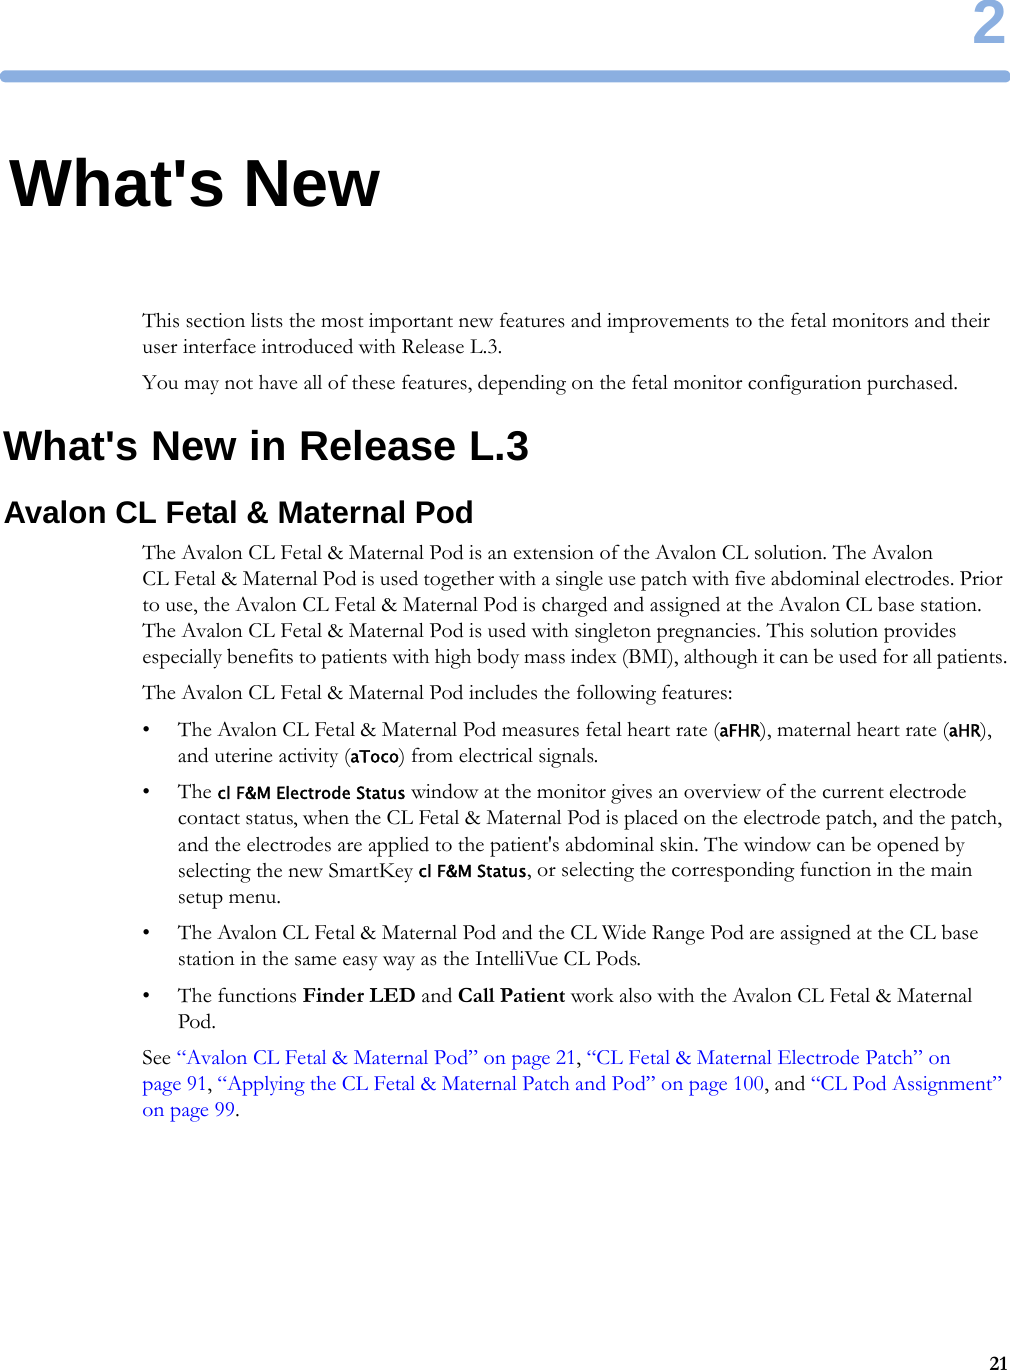 2212What&apos;s NewThis section lists the most important new features and improvements to the fetal monitors and their user interface introduced with Release L.3.You may not have all of these features, depending on the fetal monitor configuration purchased.What&apos;s New in Release L.3Avalon CL Fetal &amp; Maternal PodThe Avalon CL Fetal &amp; Maternal Pod is an extension of the Avalon CL solution. The Avalon CL Fetal &amp; Maternal Pod is used together with a single use patch with five abdominal electrodes. Prior to use, the Avalon CL Fetal &amp; Maternal Pod is charged and assigned at the Avalon CL base station. The Avalon CL Fetal &amp; Maternal Pod is used with singleton pregnancies. This solution provides especially benefits to patients with high body mass index (BMI), although it can be used for all patients.The Avalon CL Fetal &amp; Maternal Pod includes the following features:• The Avalon CL Fetal &amp; Maternal Pod measures fetal heart rate (aFHR), maternal heart rate (aHR), and uterine activity (aToco) from electrical signals.•The cl F&amp;M Electrode Status window at the monitor gives an overview of the current electrode contact status, when the CL Fetal &amp; Maternal Pod is placed on the electrode patch, and the patch, and the electrodes are applied to the patient&apos;s abdominal skin. The window can be opened by selecting the new SmartKey cl F&amp;M Status, or selecting the corresponding function in the main setup menu.• The Avalon CL Fetal &amp; Maternal Pod and the CL Wide Range Pod are assigned at the CL base station in the same easy way as the IntelliVue CL Pods.• The functions Finder LED and Call Patient work also with the Avalon CL Fetal &amp; Maternal Pod.See “Avalon CL Fetal &amp; Maternal Pod” on page 21, “CL Fetal &amp; Maternal Electrode Patch” on page 91, “Applying the CL Fetal &amp; Maternal Patch and Pod” on page 100, and “CL Pod Assignment” on page 99.